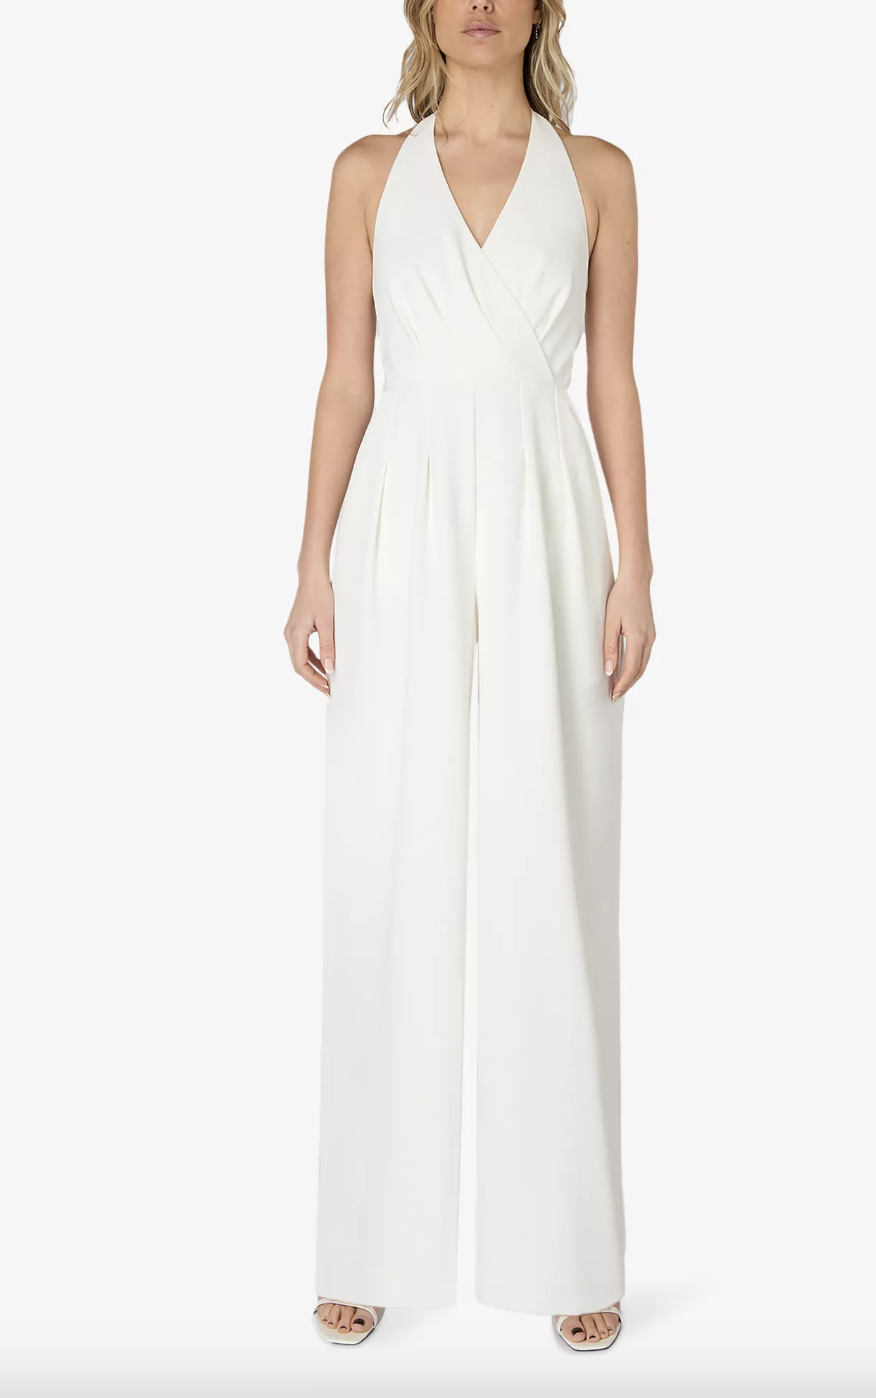 <p><strong>£199.00</strong></p><p><a href="https://www.selfridges.com/GB/en/product/rozo-wide-leg-halter-neck-stretch-woven-jumpsuit_R04317050/#colour=WHITE">Shop Now</a></p><p>RO&ZO's white jumpsuit is defined by its flattering halter-neck, fitted waist and wide-leg style. You'll wear this one on repeat, long after the wedding, too.</p>